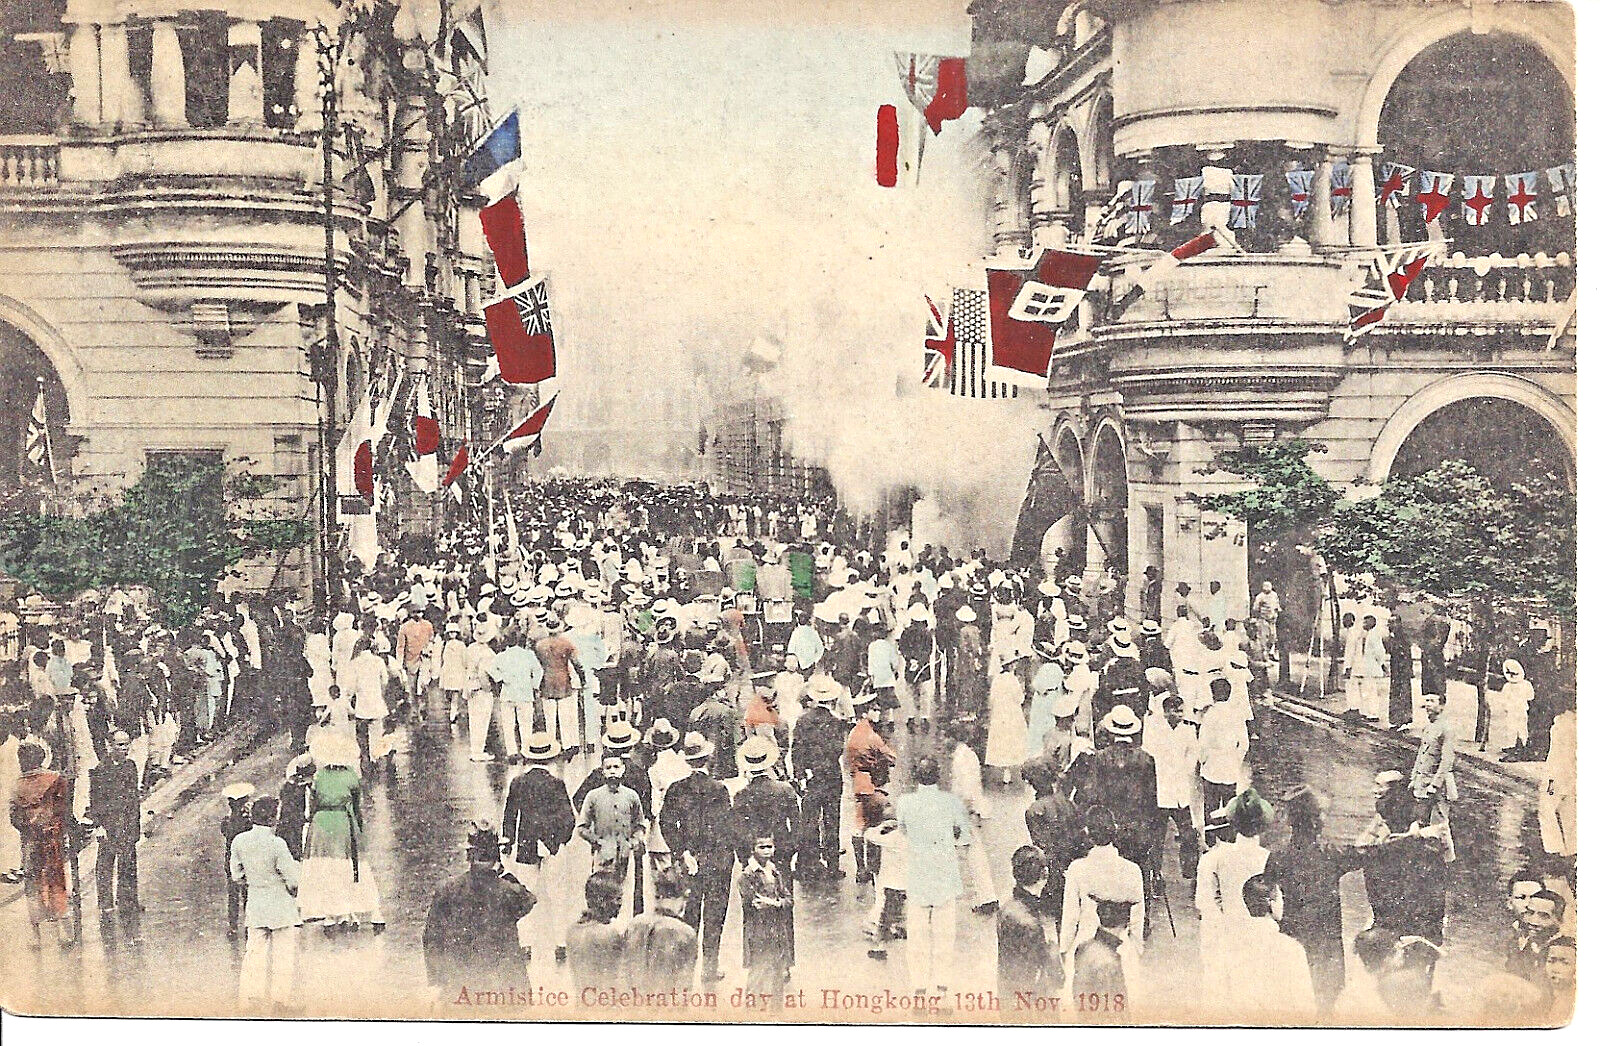 VINTAGE AMERICAN CELEBRATION DAY 1918 HONG KONG POST CARD NOT POSTED